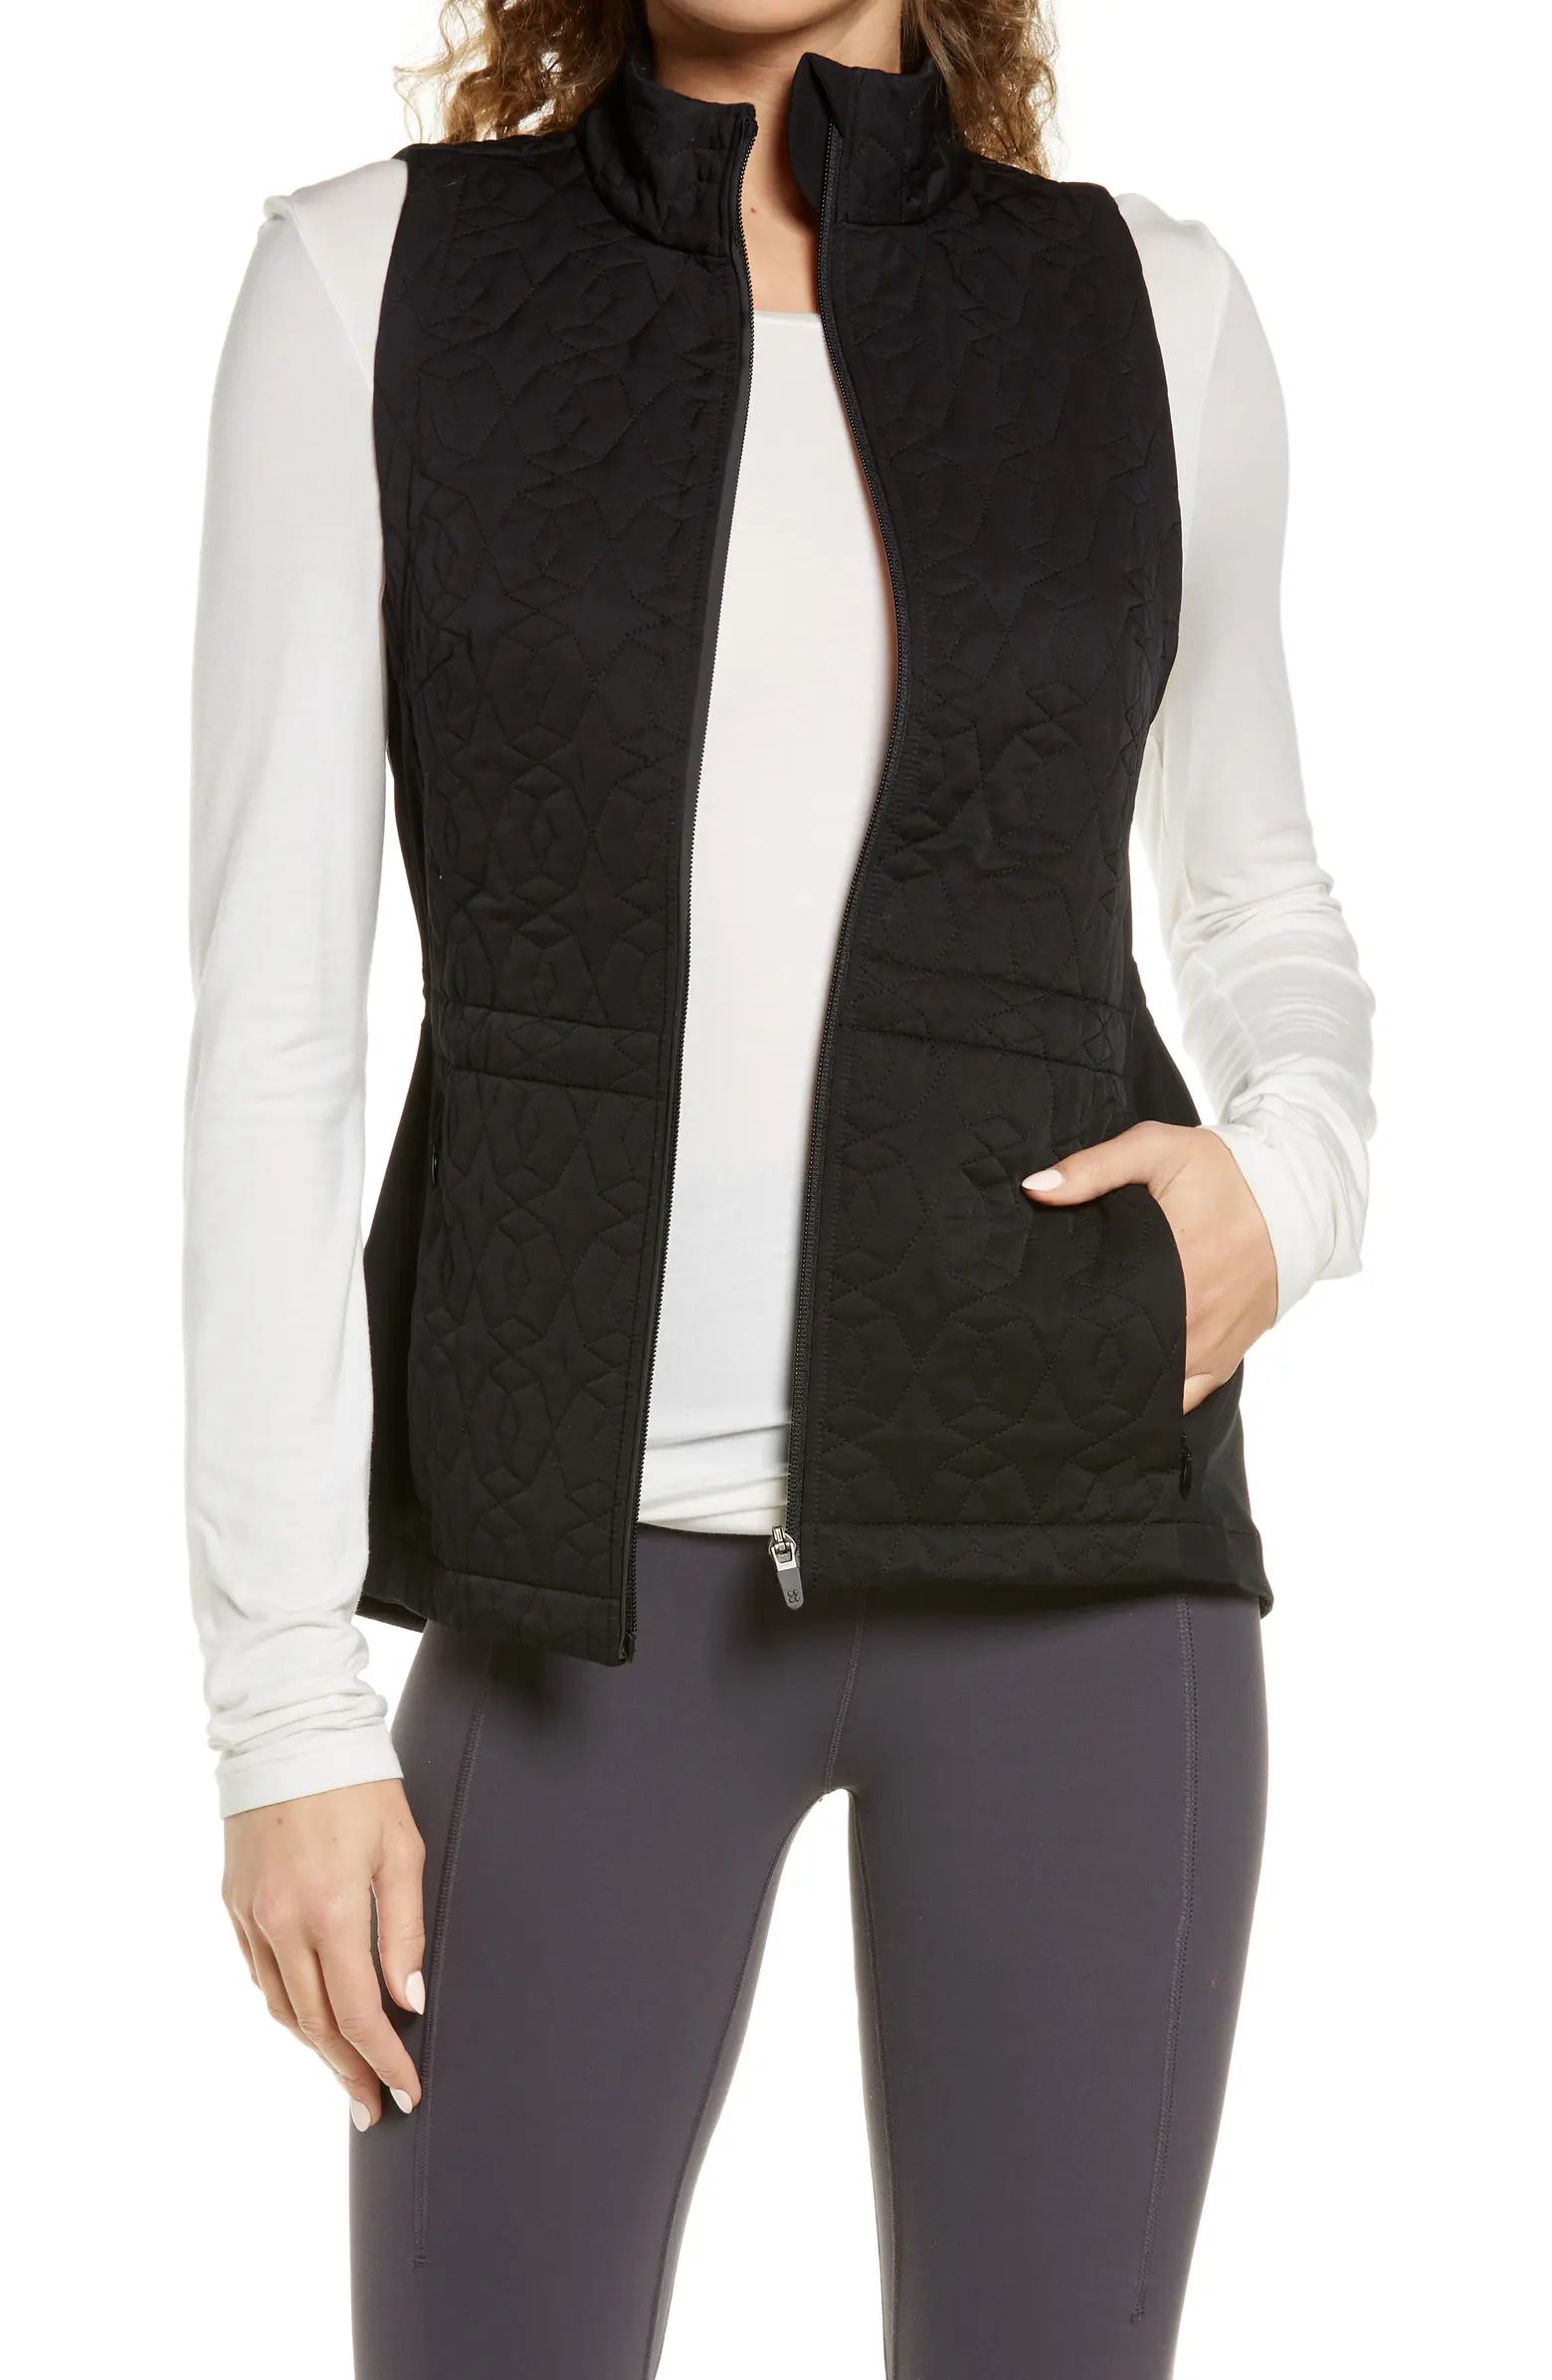 Sweaty Betty Fast Track Water Resistant Thermal Running Vest | Nordstrom | Nordstrom